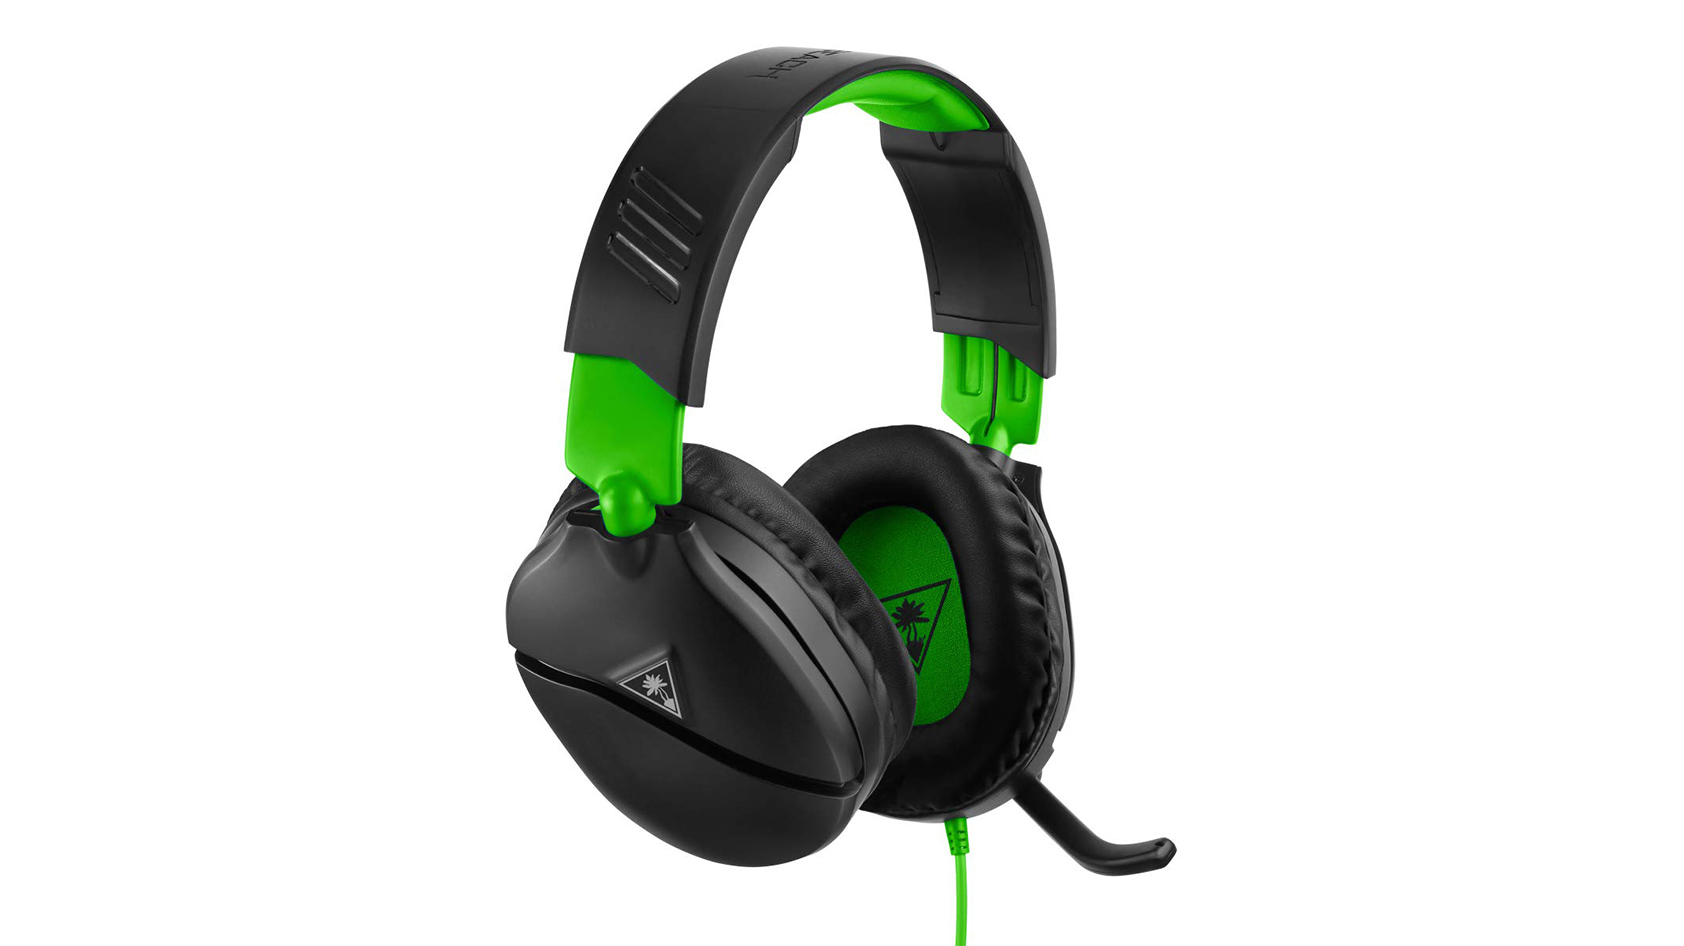 The Turtle Beach Recon 70 in black and green against a white background.